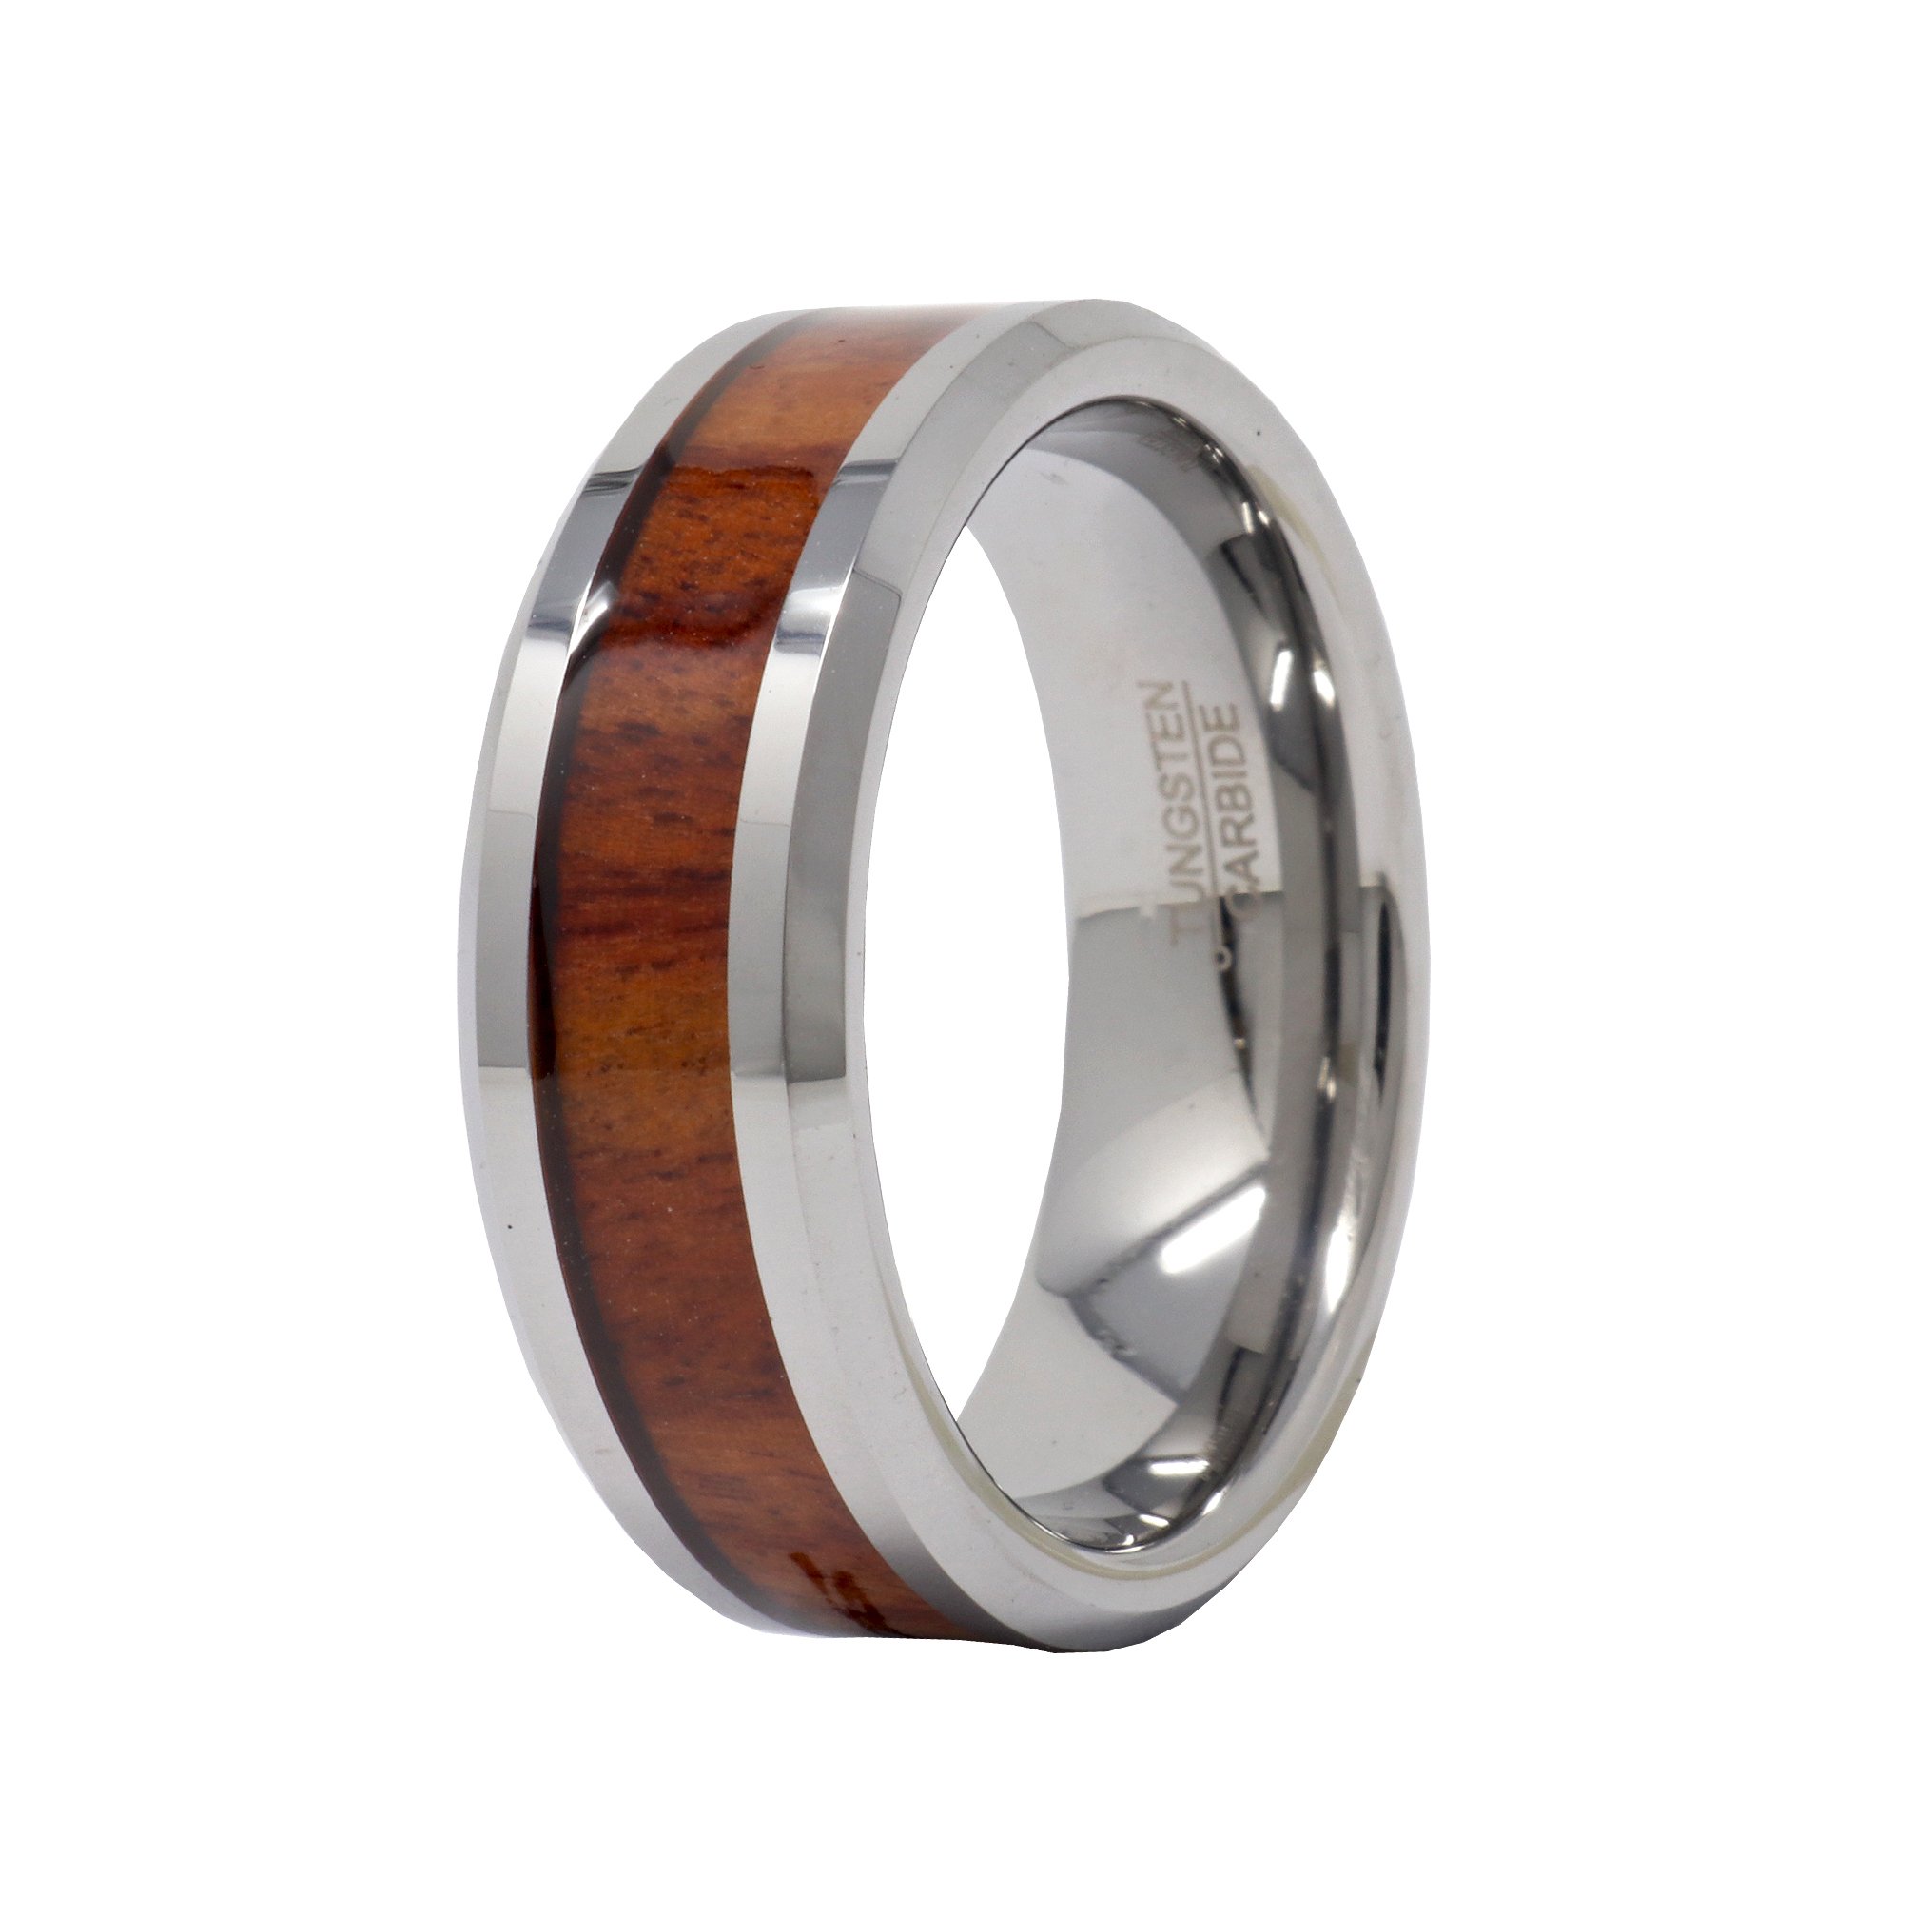 Tungsten Ring Size 9.5 - 8mm High Polished With Mahogany Wood Center